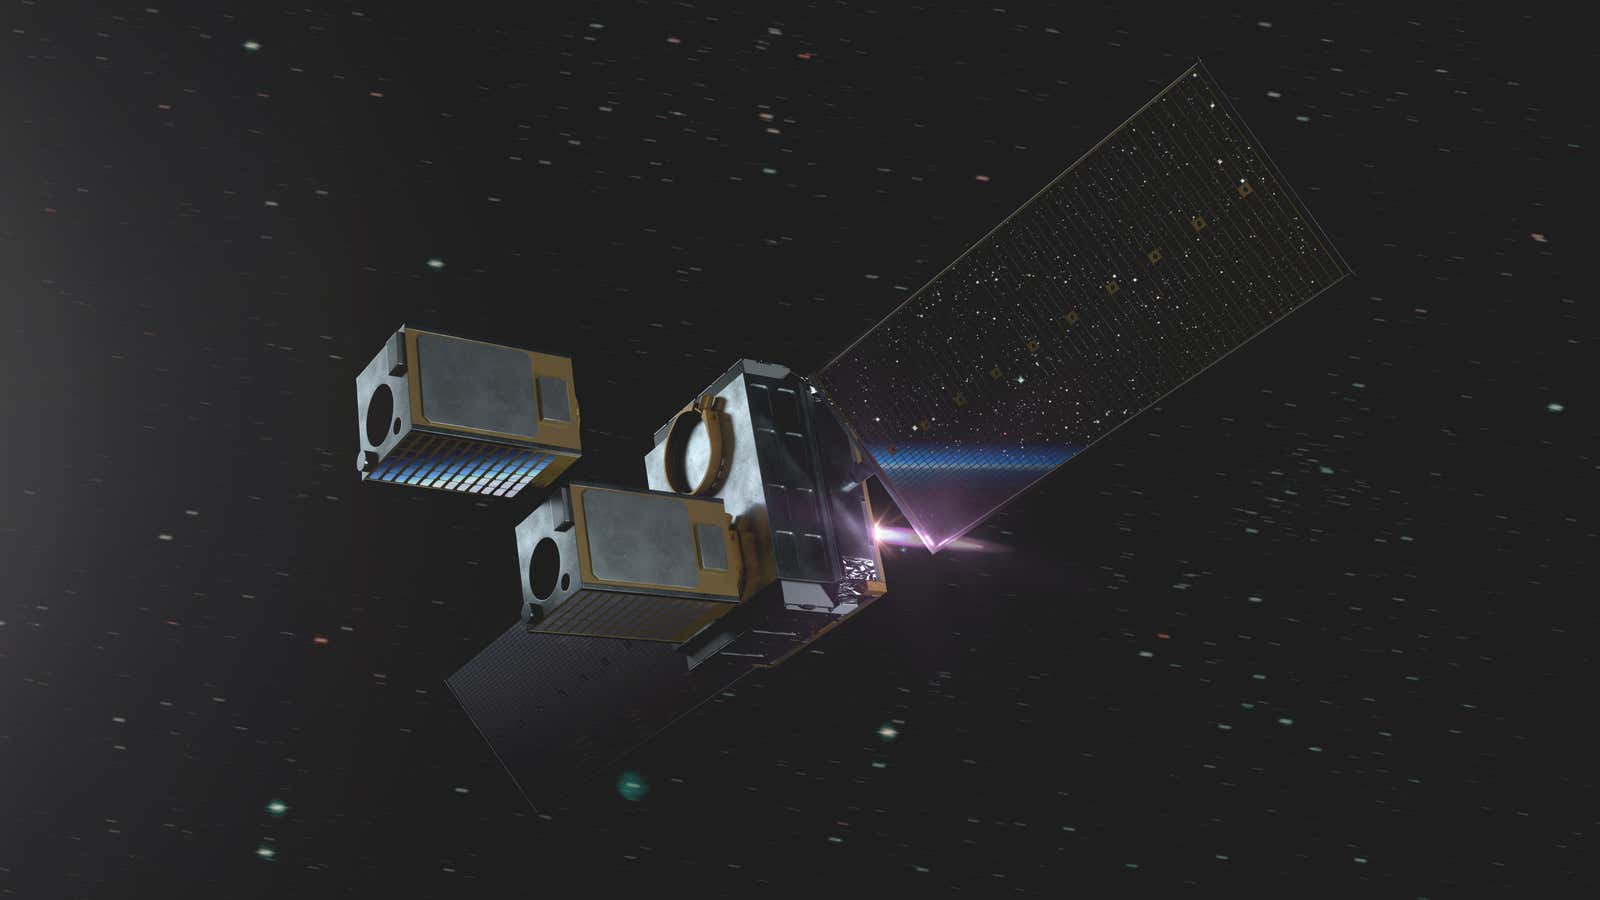 A rendering of Momentus’ space tug in action.